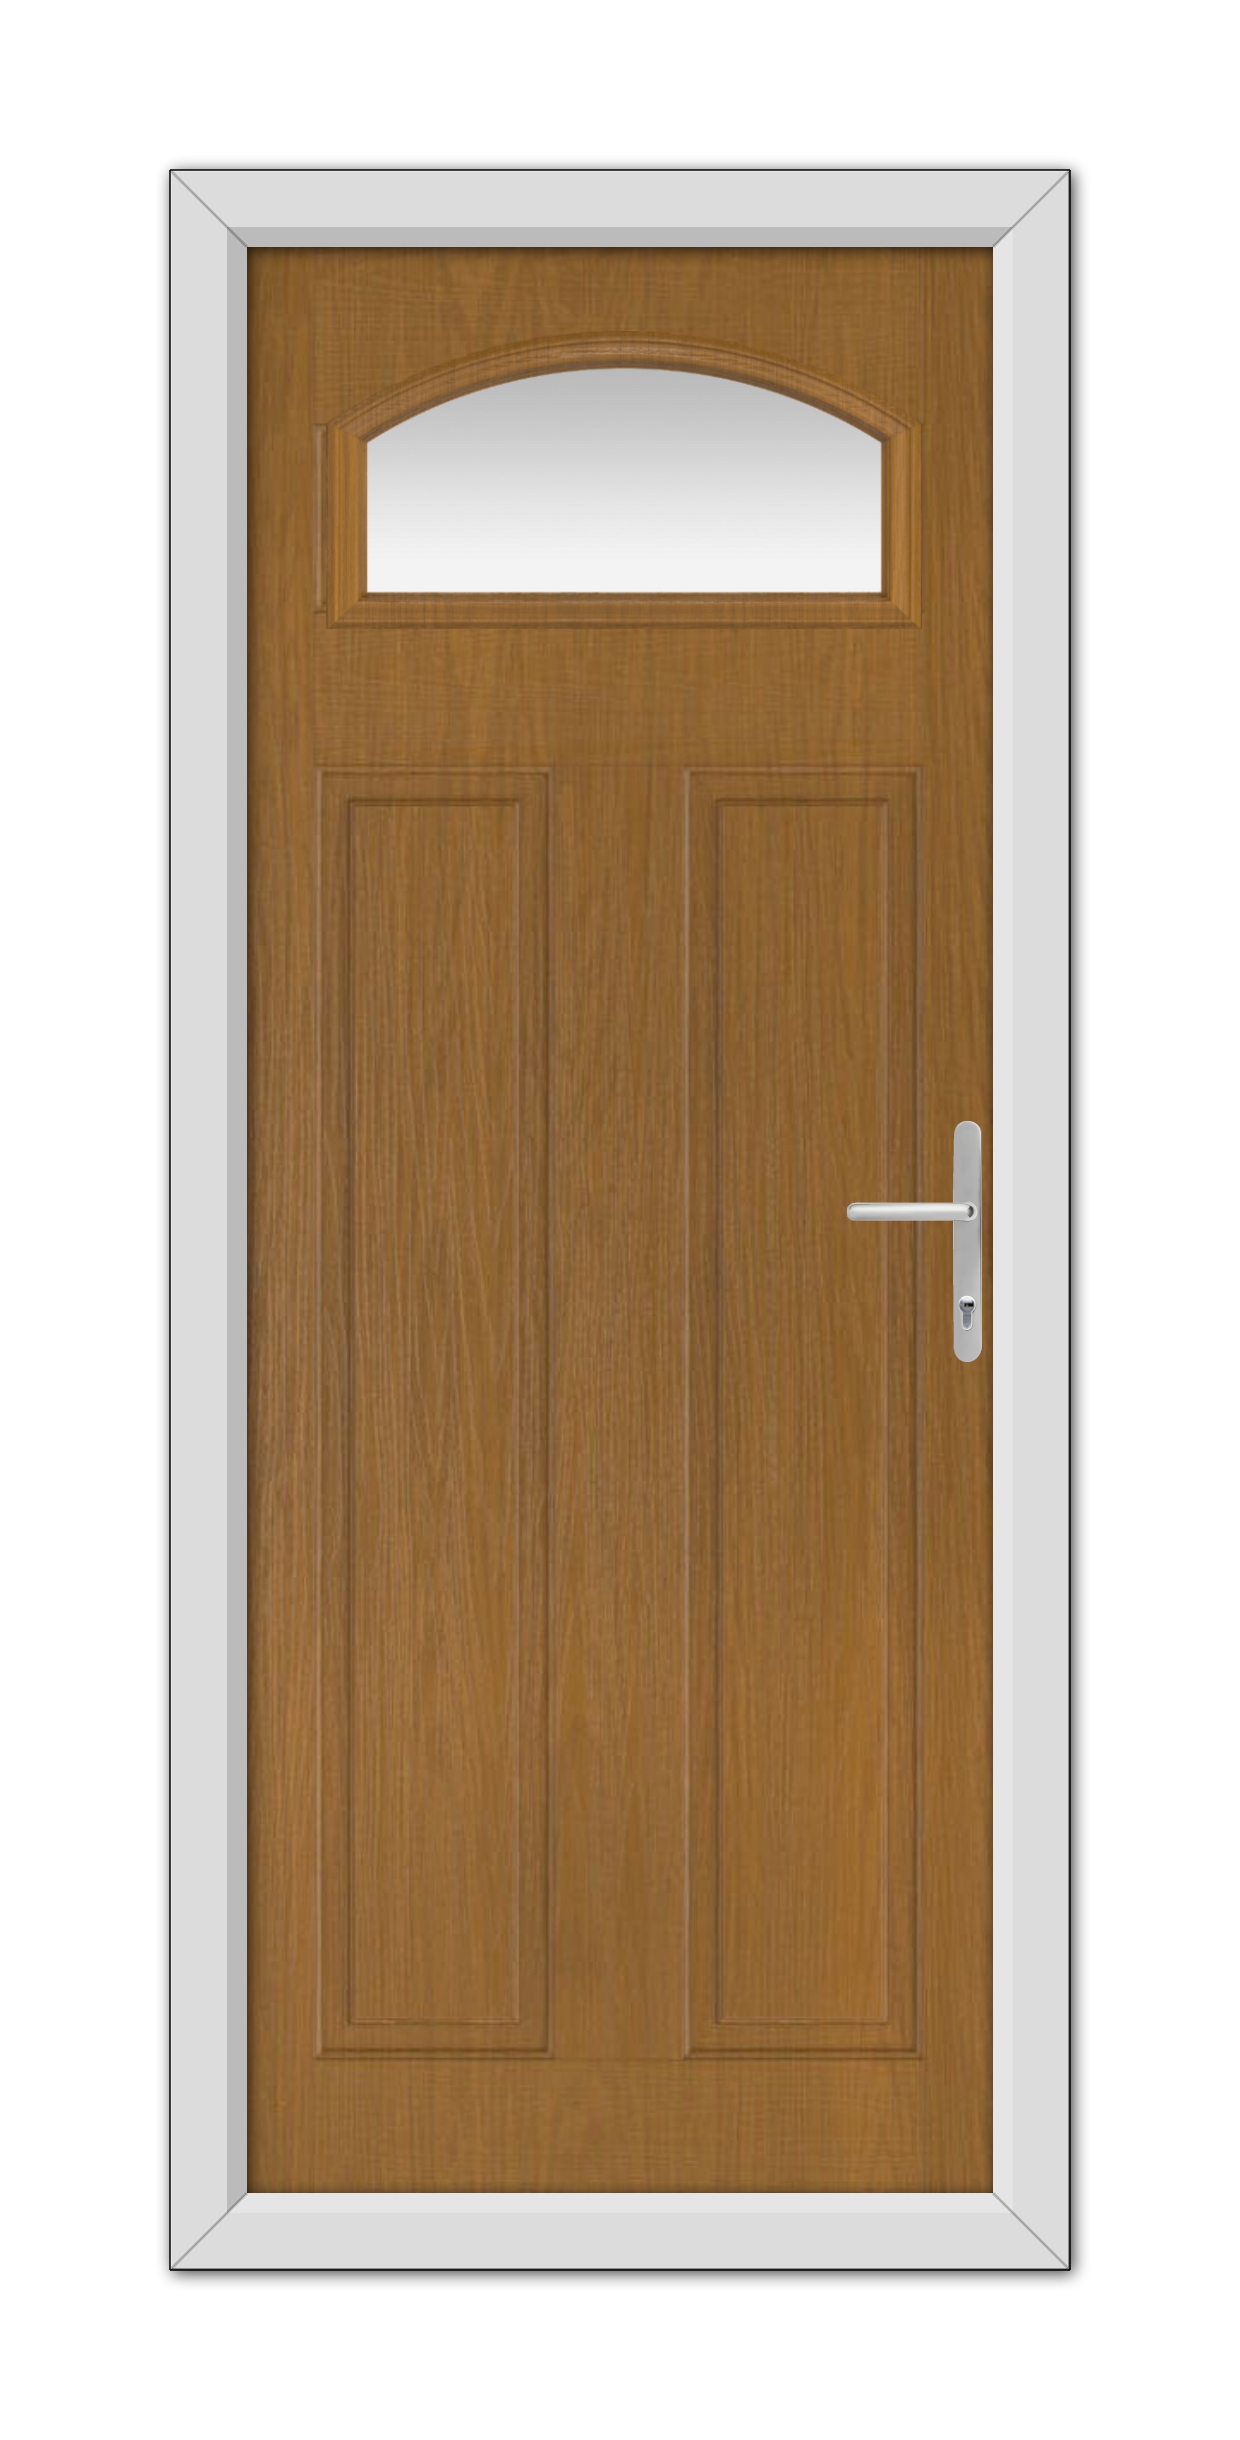 Oak Harlington Composite Door 48mm Timber Core with a white frame, featuring an oval window at the top and a metal handle on the right side.